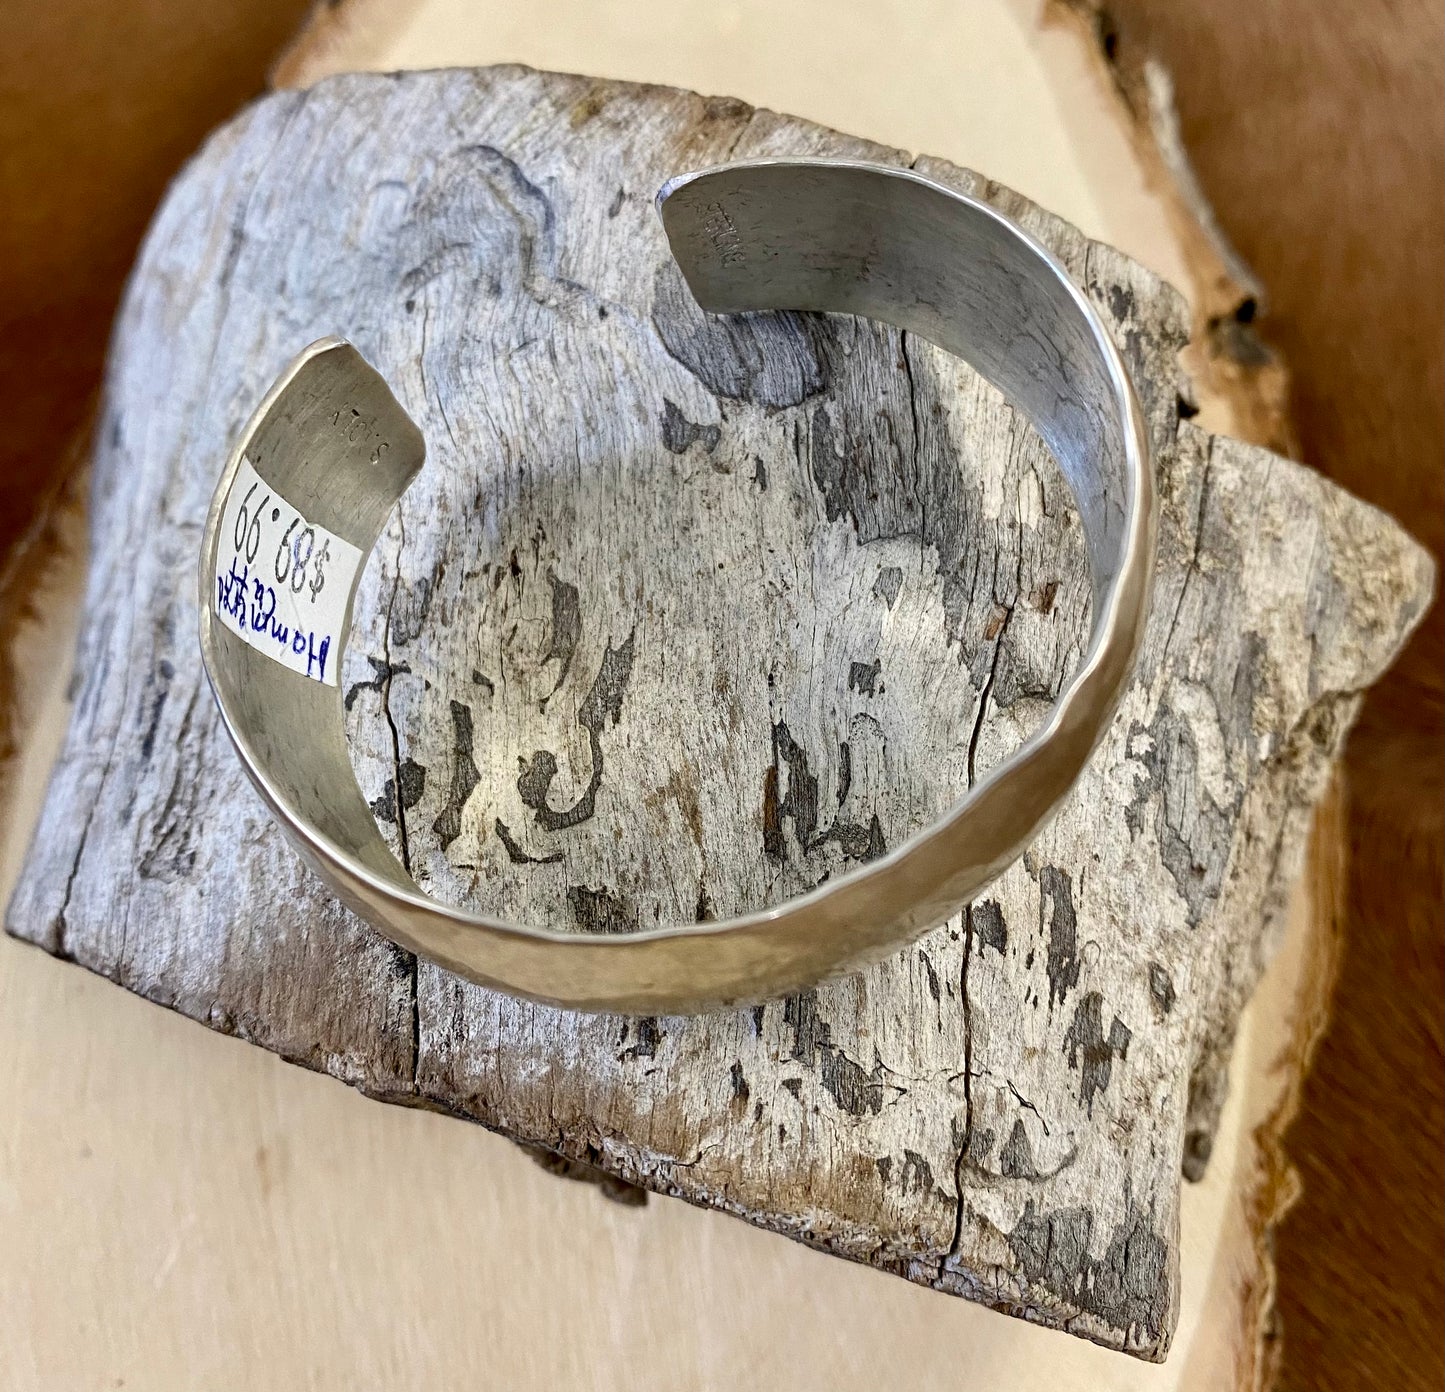 The Silver Cowboy Cuff Signed By Sarah Cly